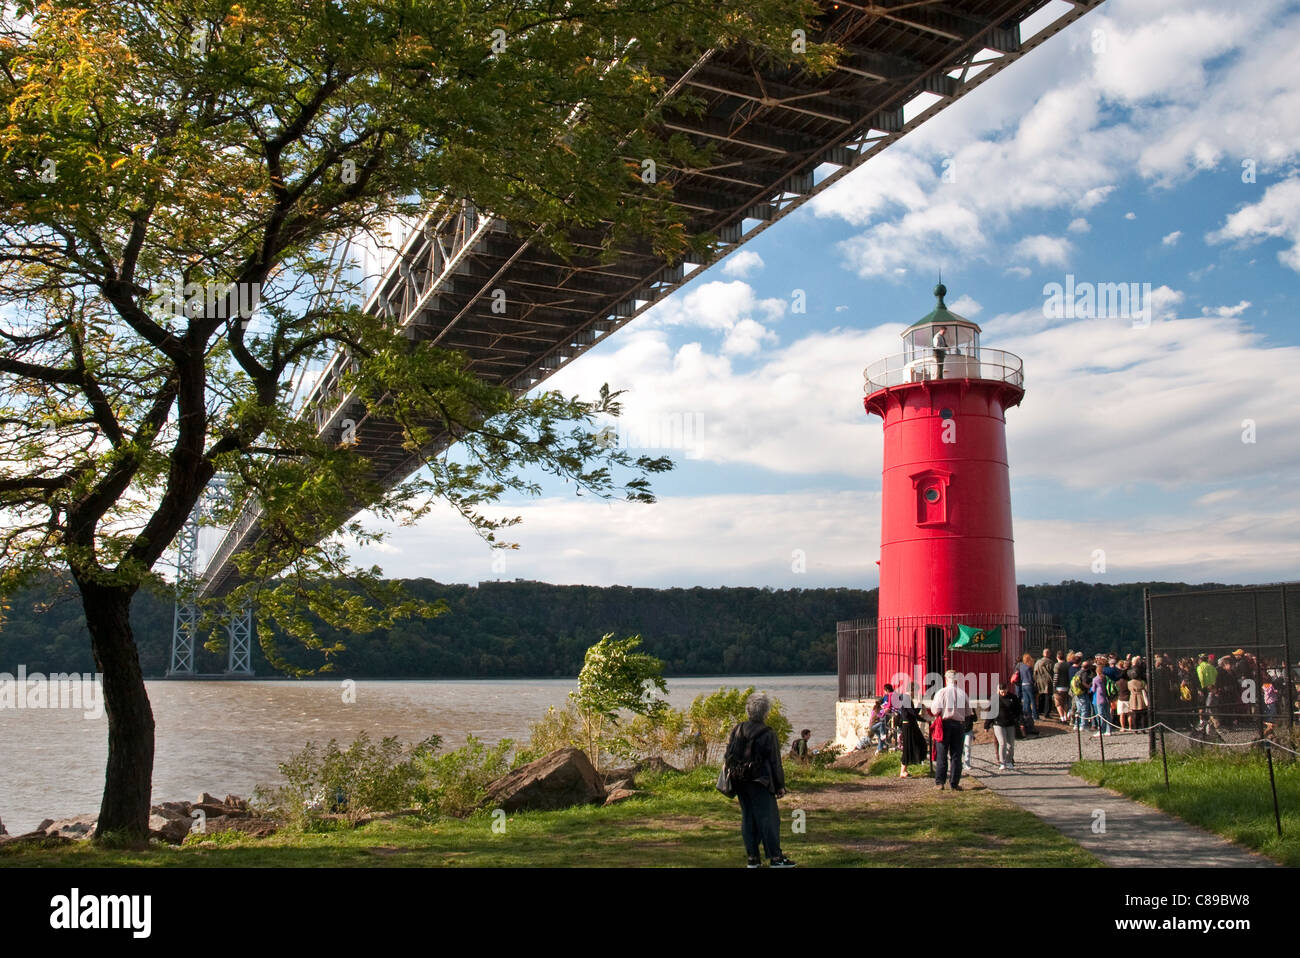 The Little Red Lighthouse, officially Jeffrey's Hook Lighthouse, at the base of the George Washington Bridge in New York City. Stock Photo